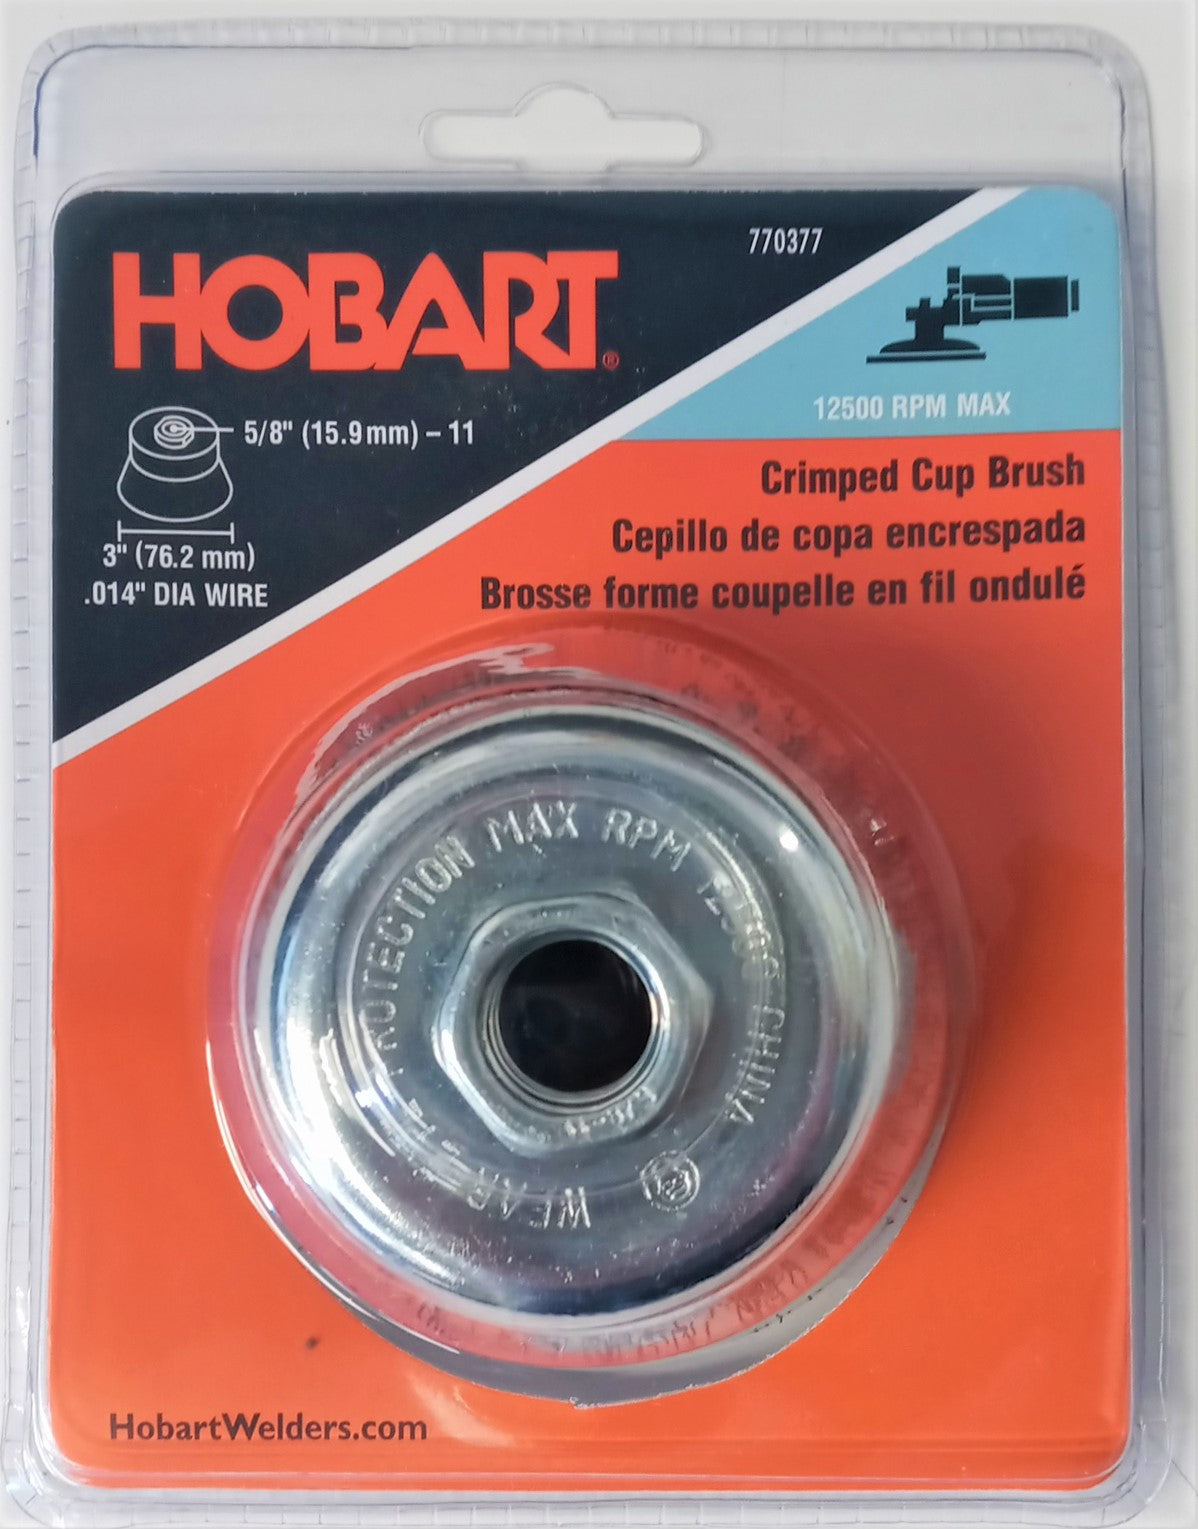 Hobart 770377 Crimped Cup Brush 3" x .014" x 5/8" 11